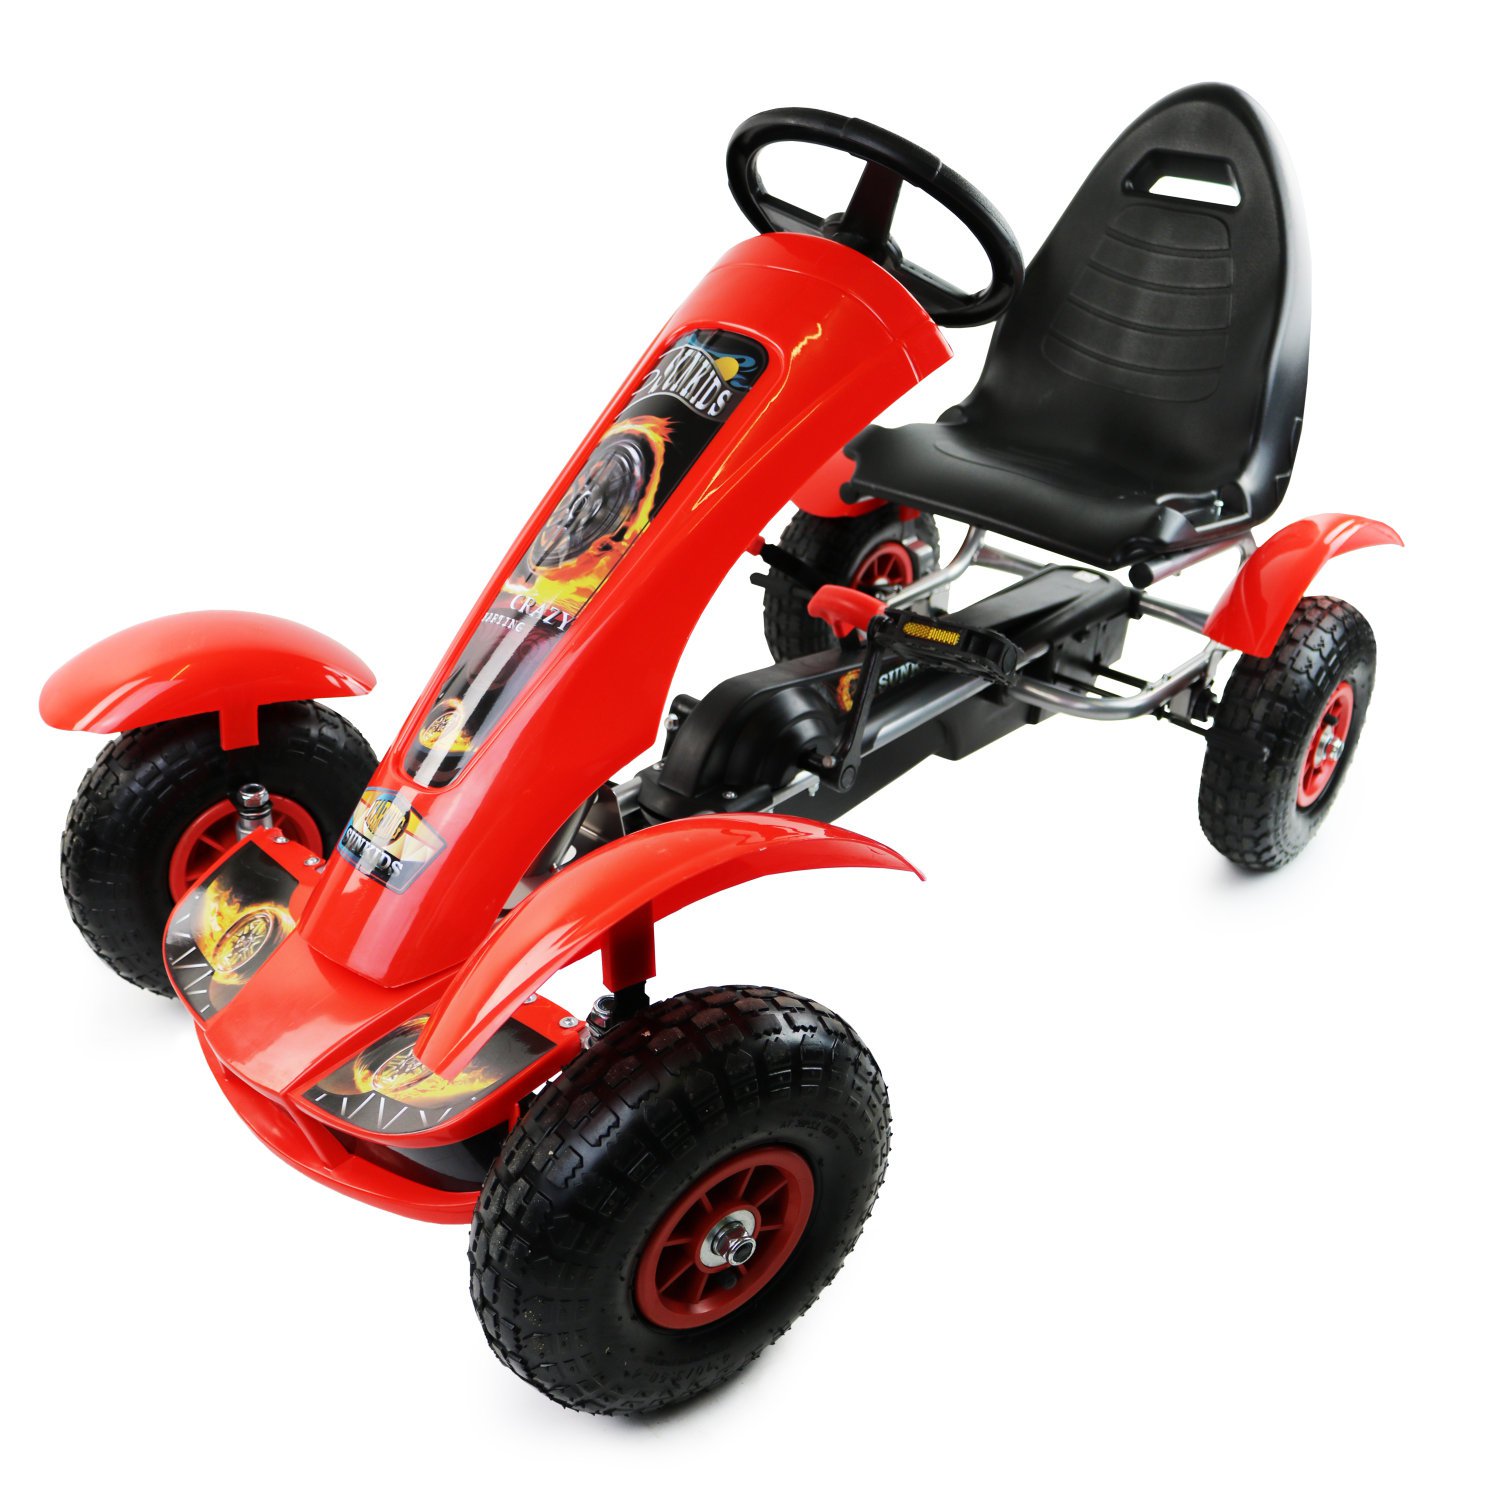 Deluxe Red Kids Childrens Pedal Go Kart Ride On Rubber Wheels